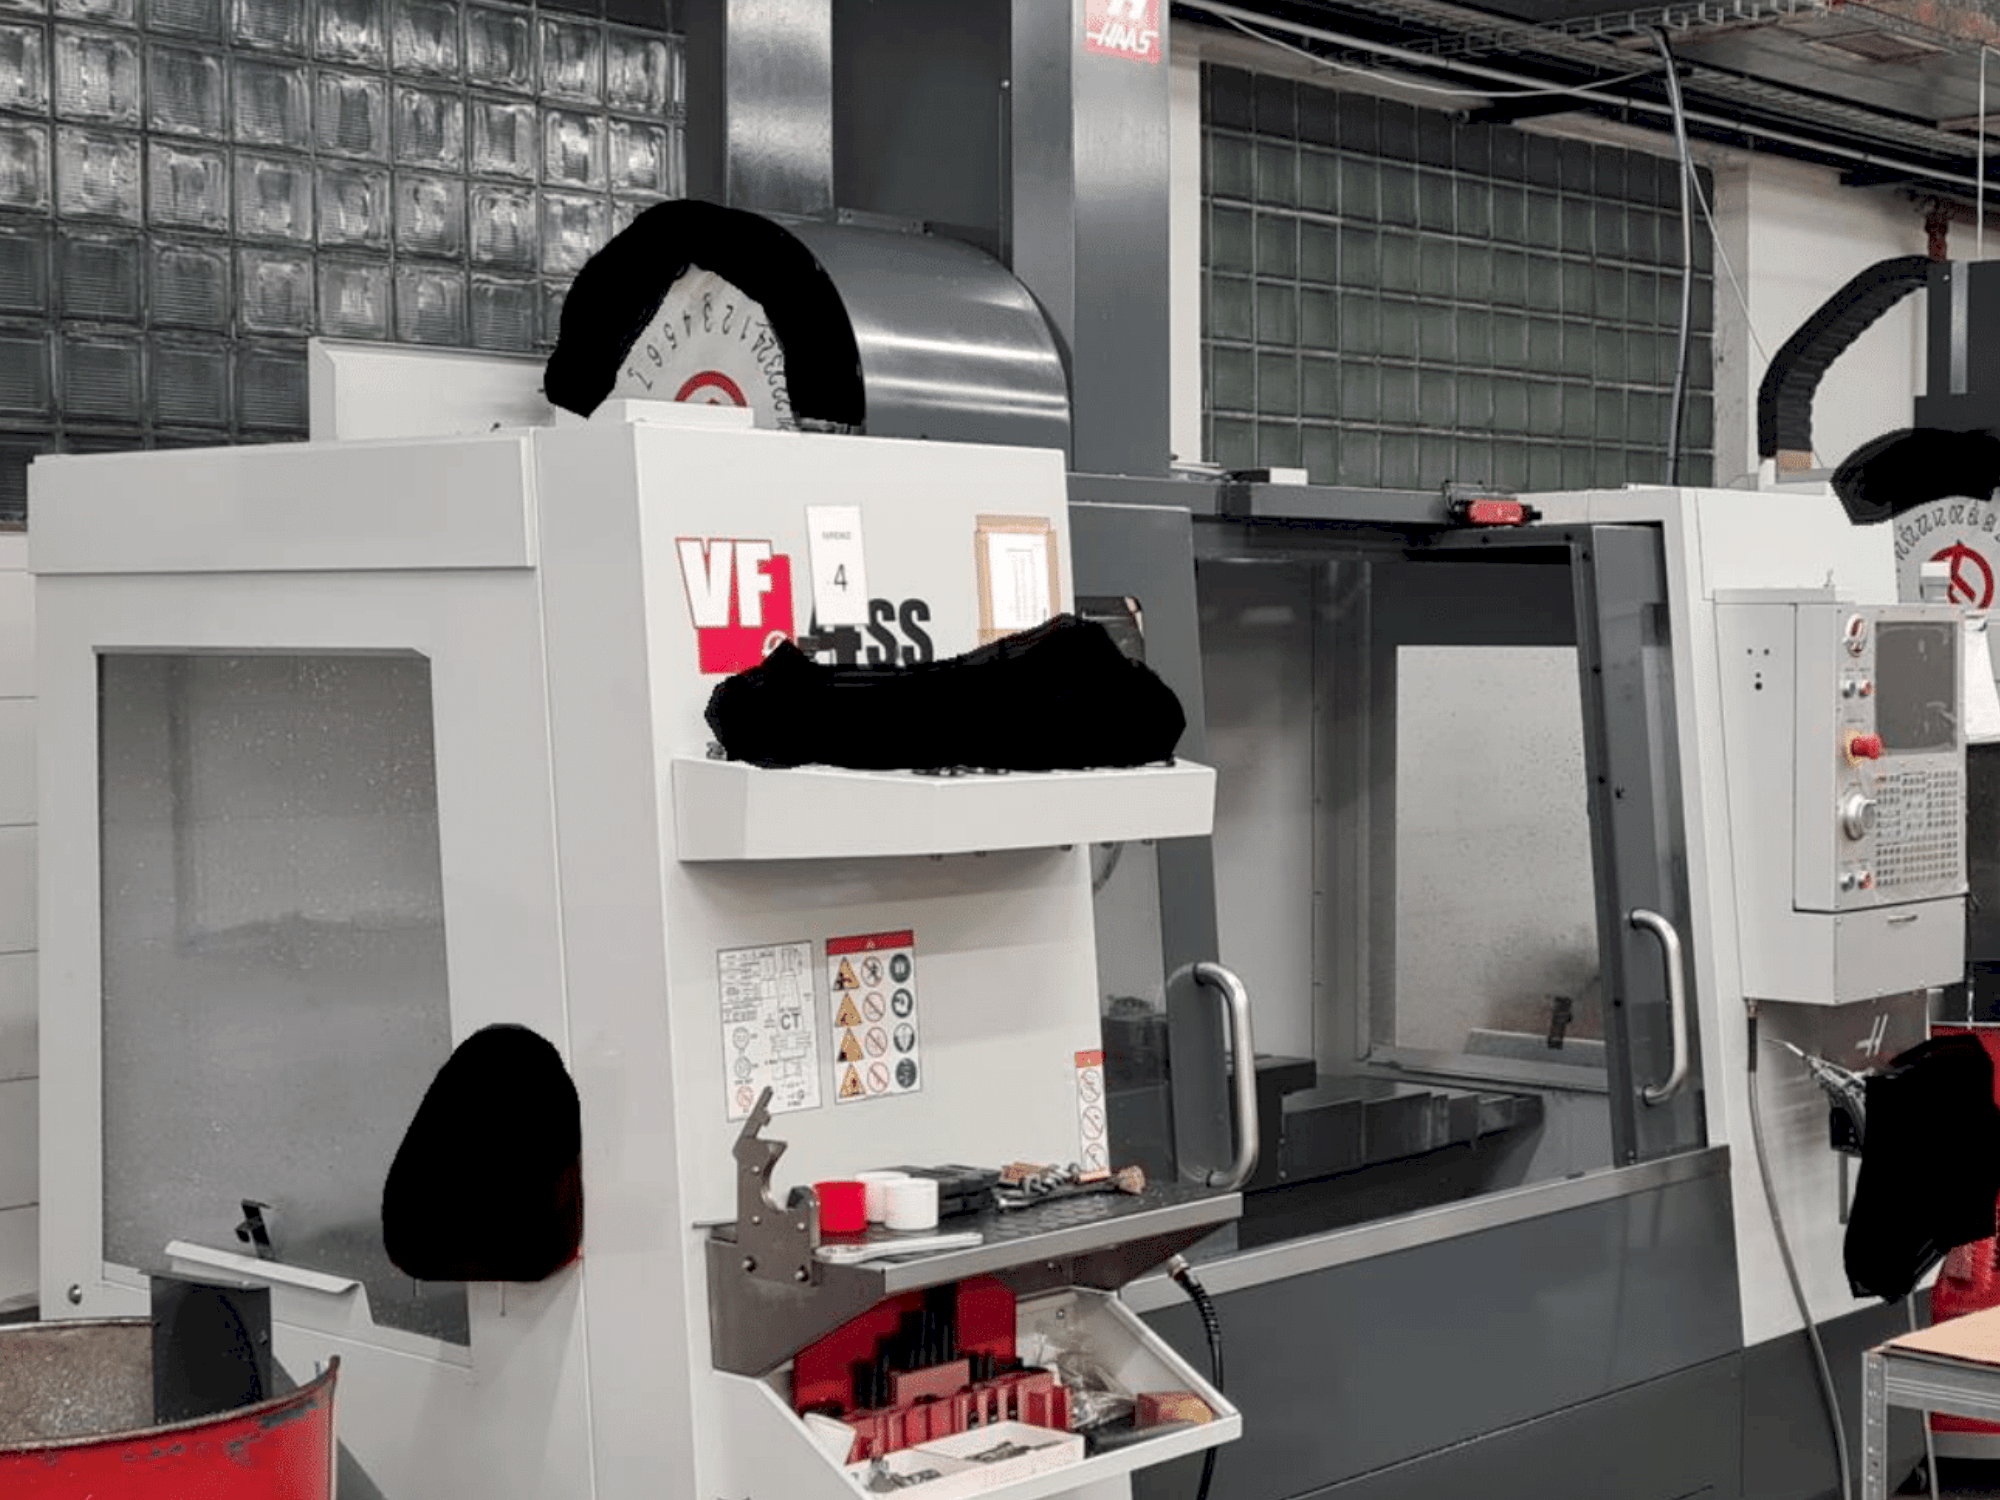 Front view of HAAS VF-4SS  machine